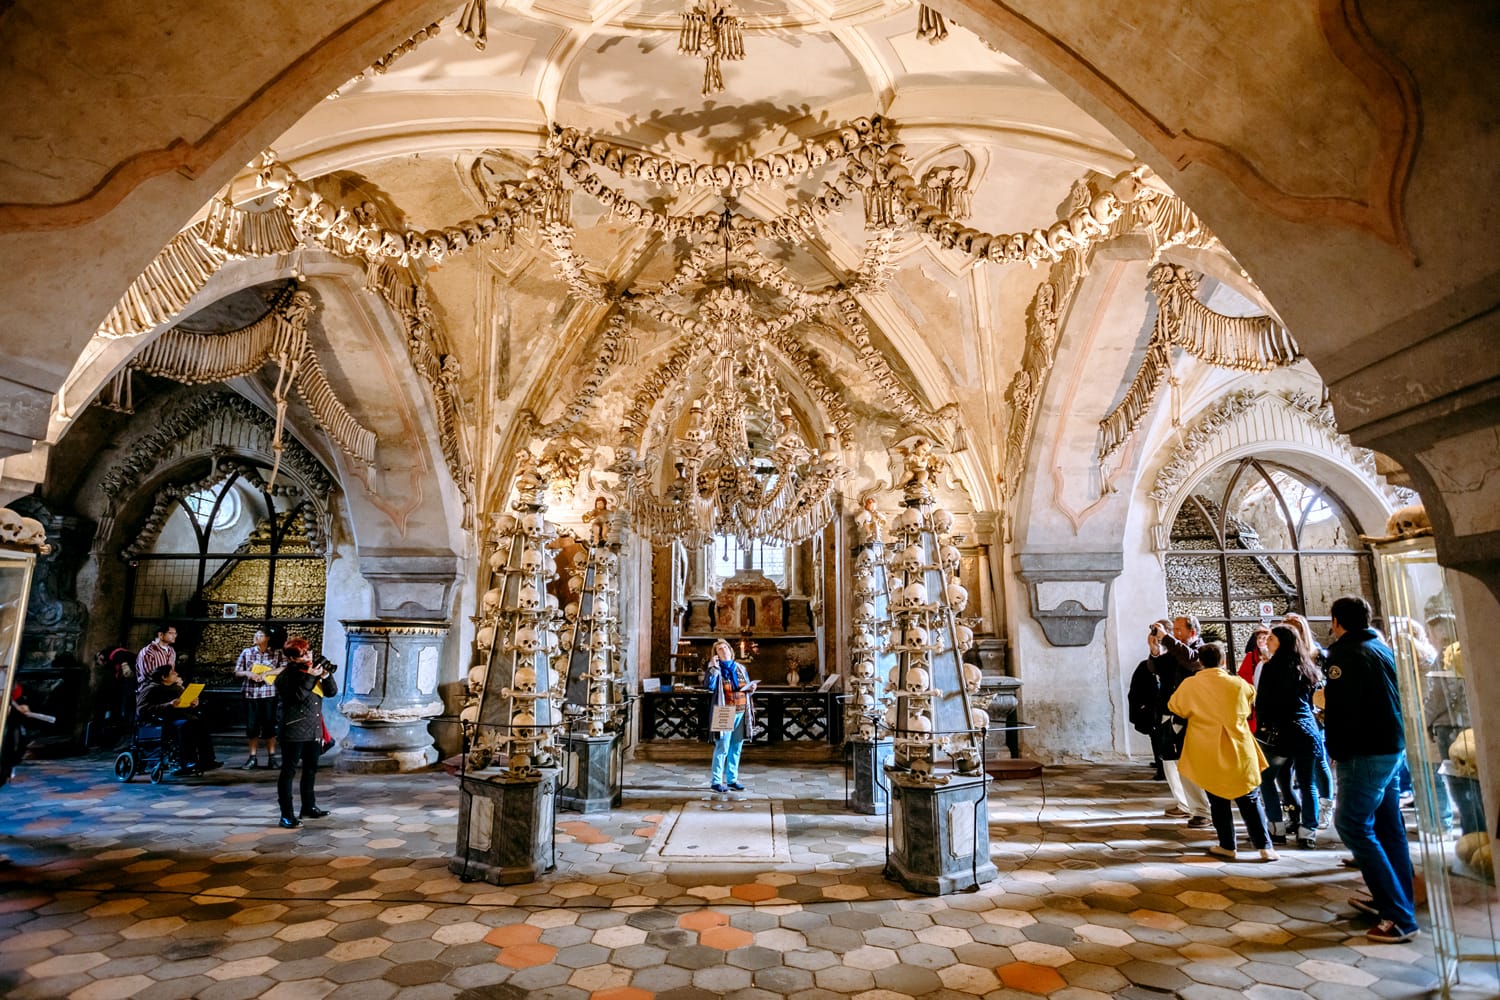 People visiting the ossuary in Sedlec Kostnice. Ossuary Contain Skeletons about 50,000 People, Whose Bones Been Arranged To Form Decorations For Chapel.